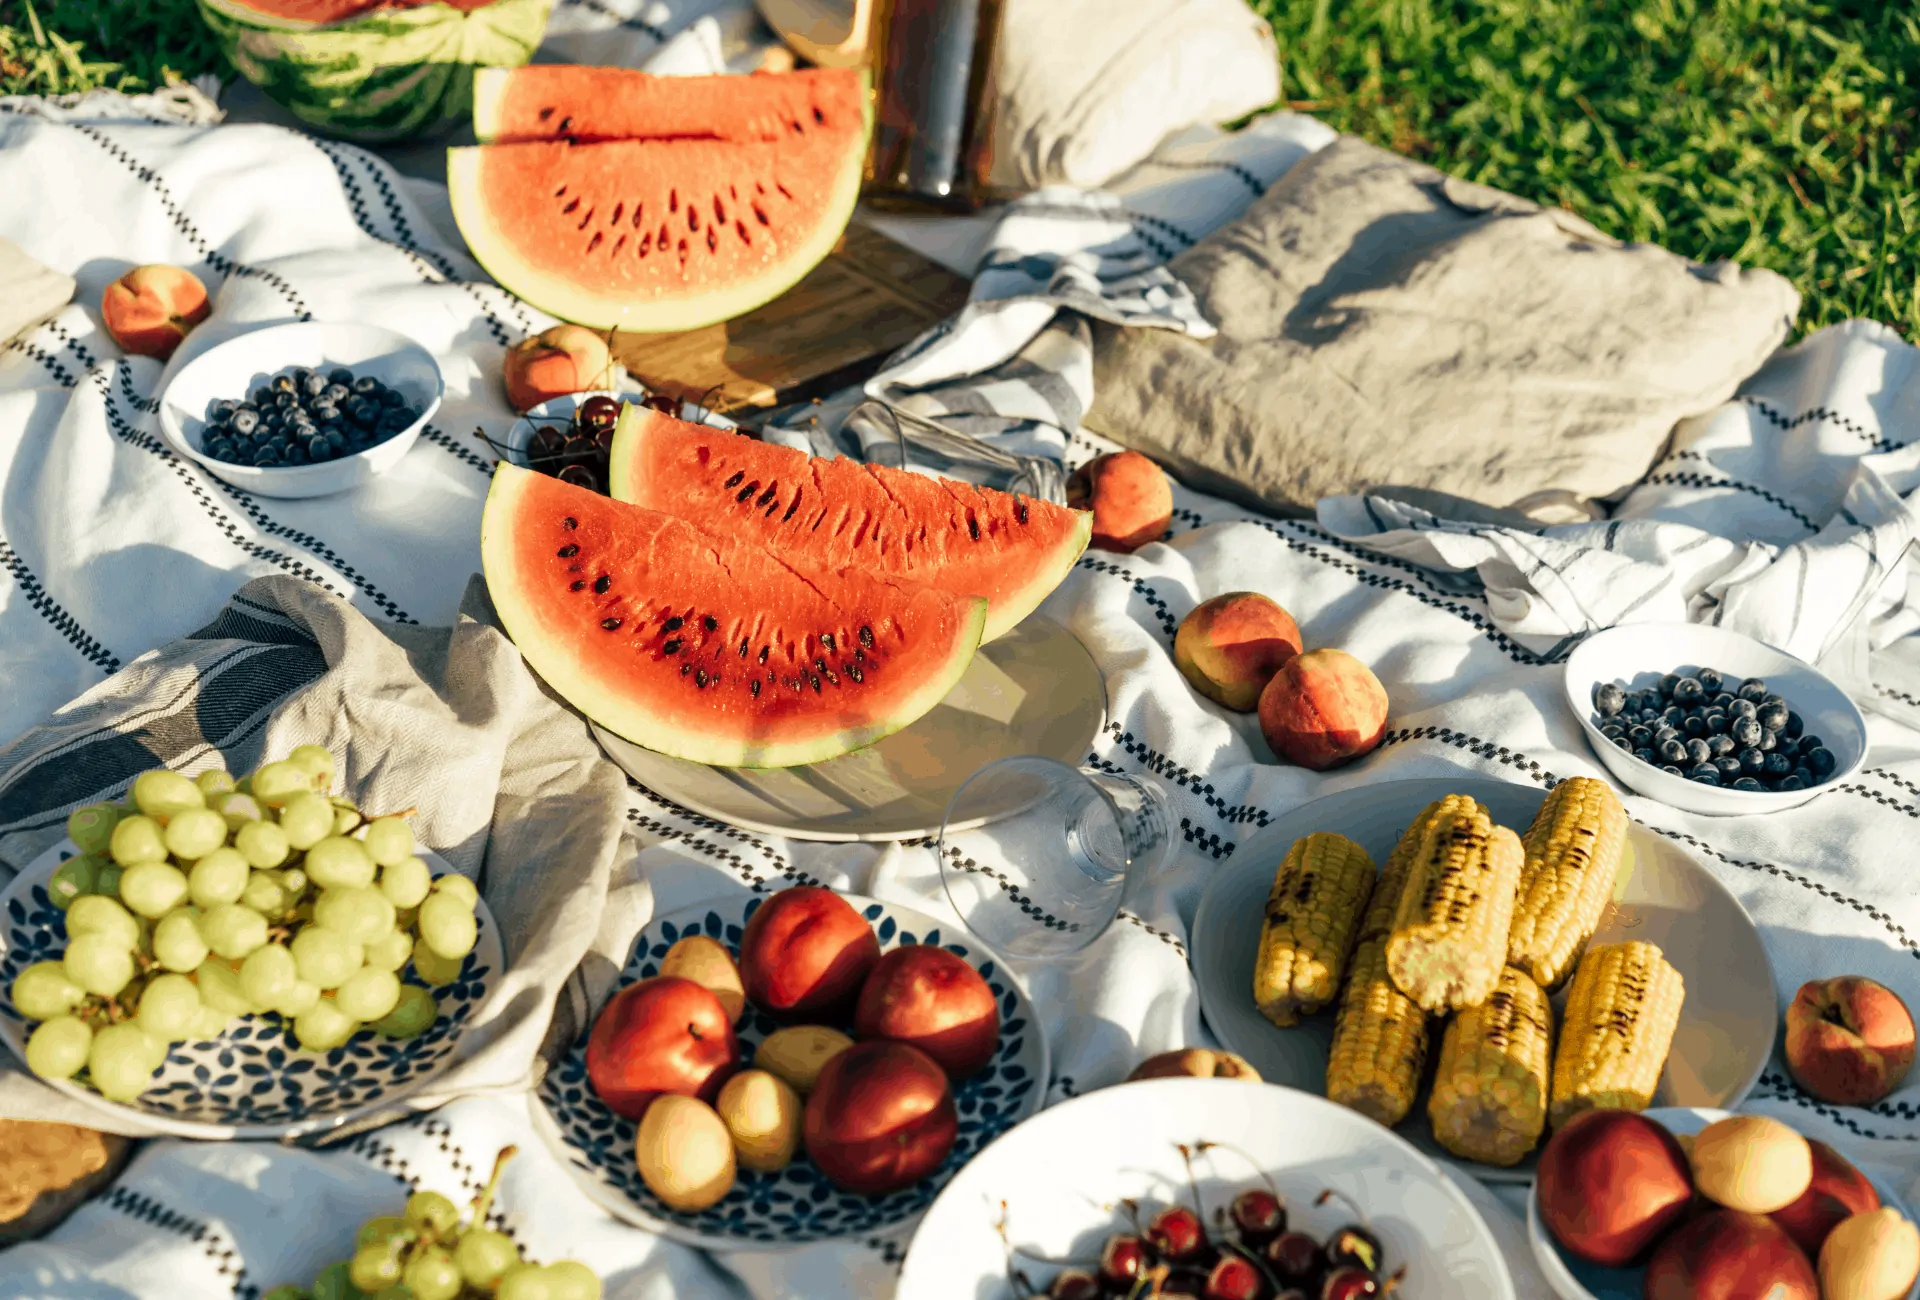 Fruits and vegetables on picnic blanket